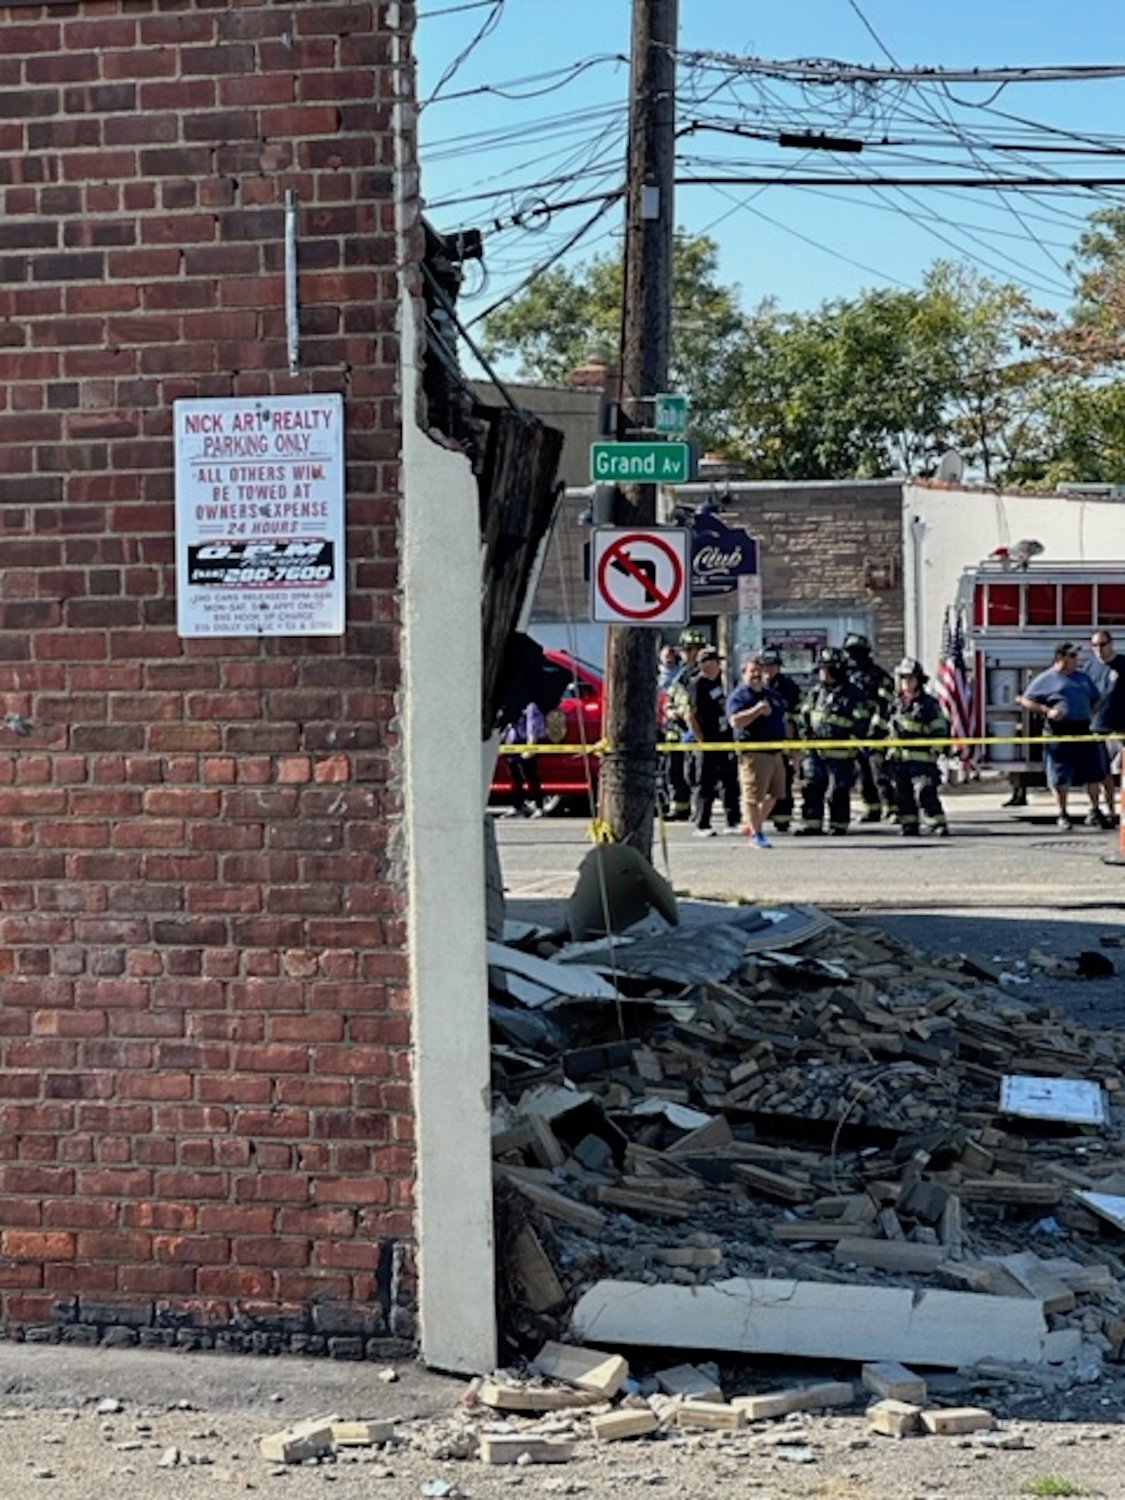 Baldwin firefighters securing the scene of a partially collapsed building façade at the intersection of Grand Avenue and Smith Street.